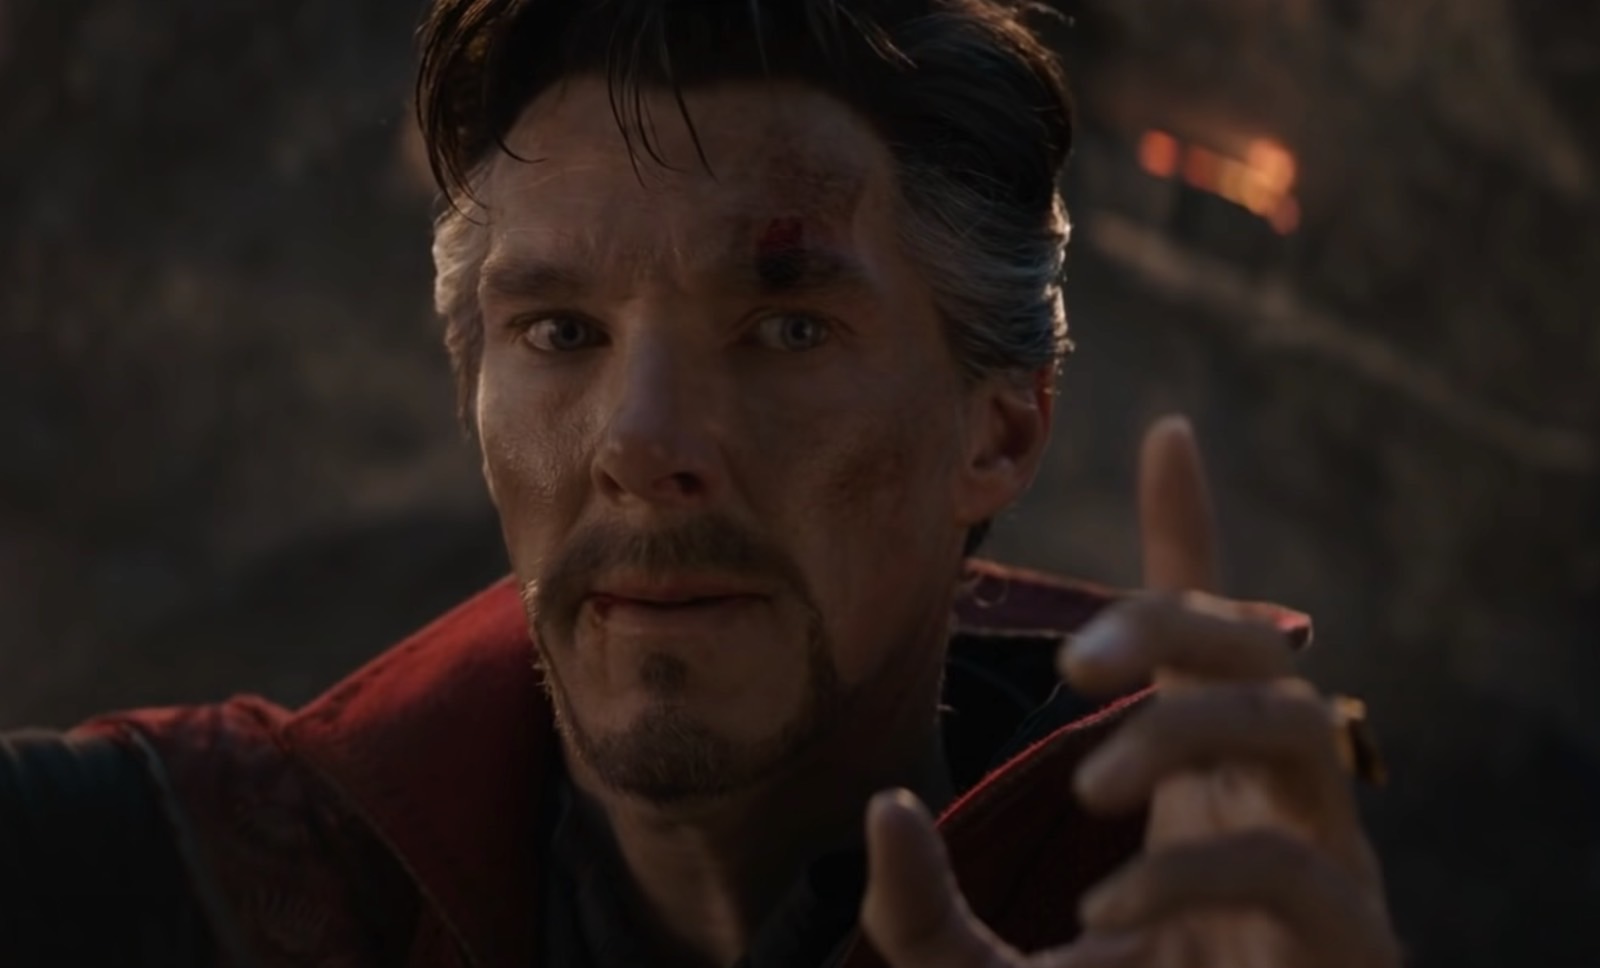 According to a wild leak, Doctor Strange 2 may fix Marvel’s X-Men issue.